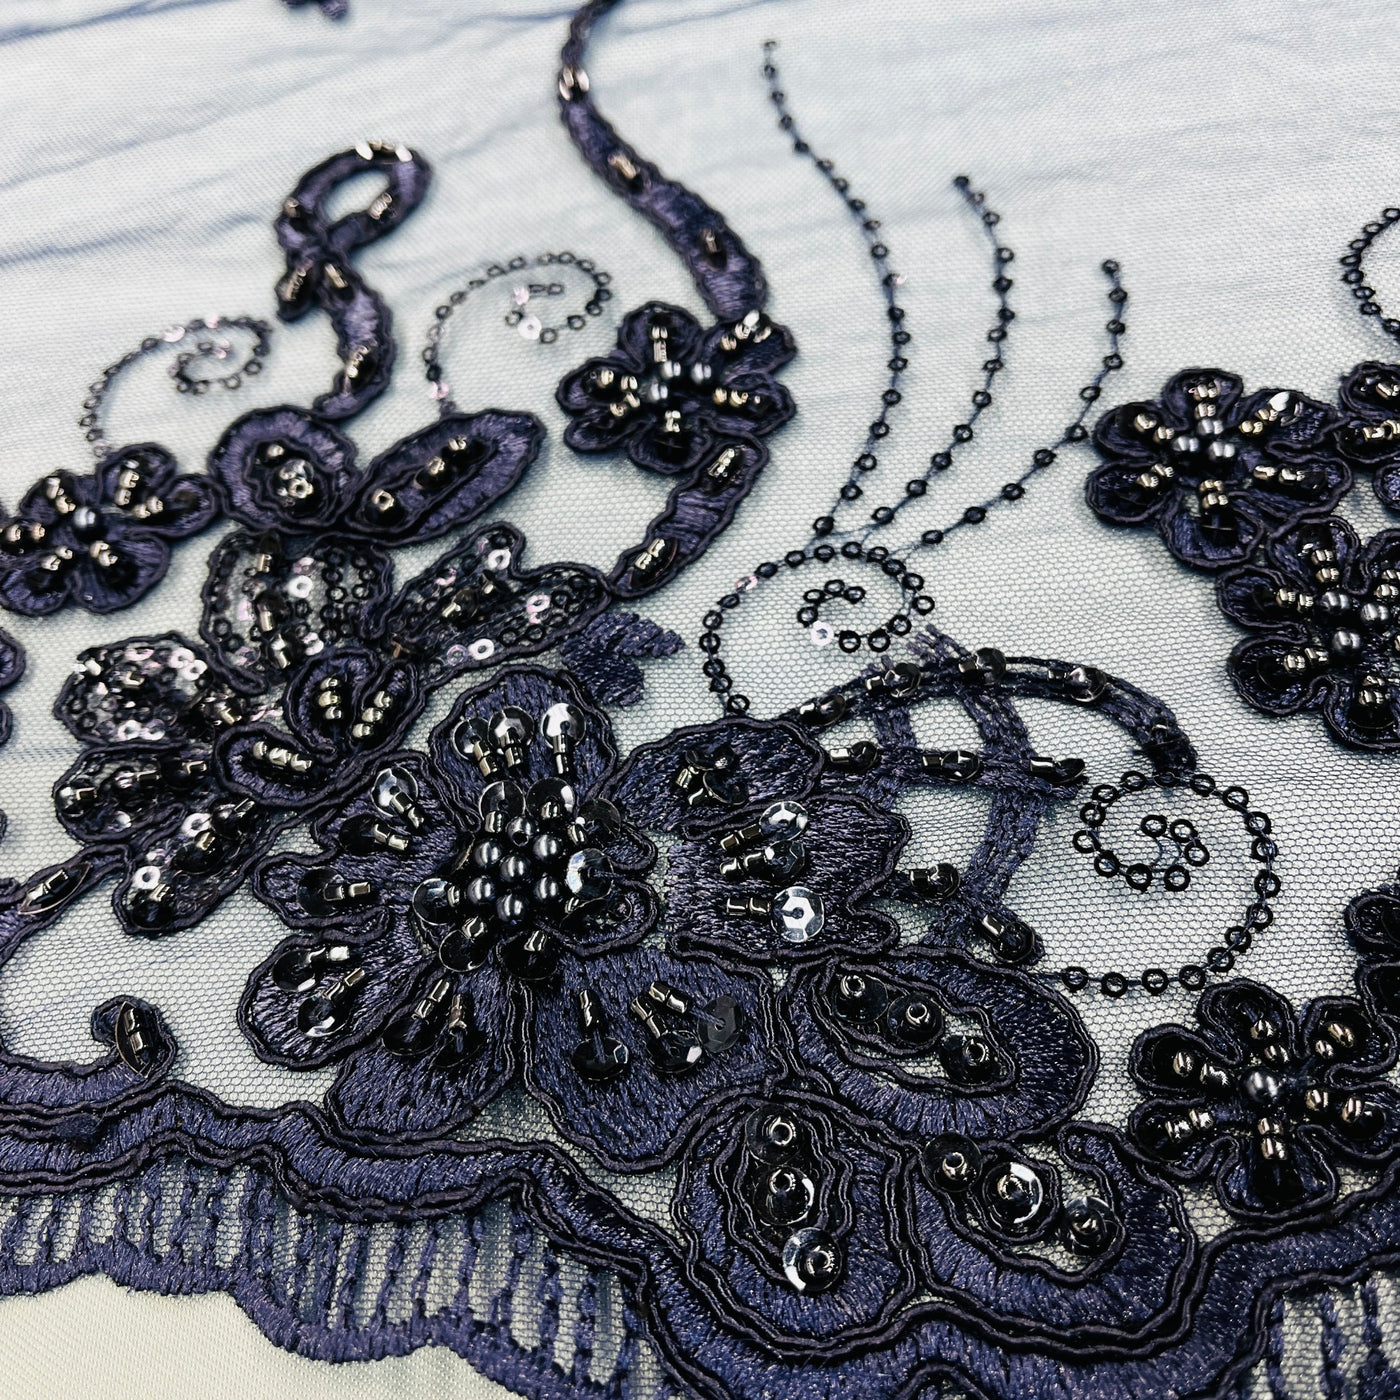 Beaded & Corded Lace Fabric Embroidered on 100% Polyester Net Mesh | Lace USA - GD-1807 Navy